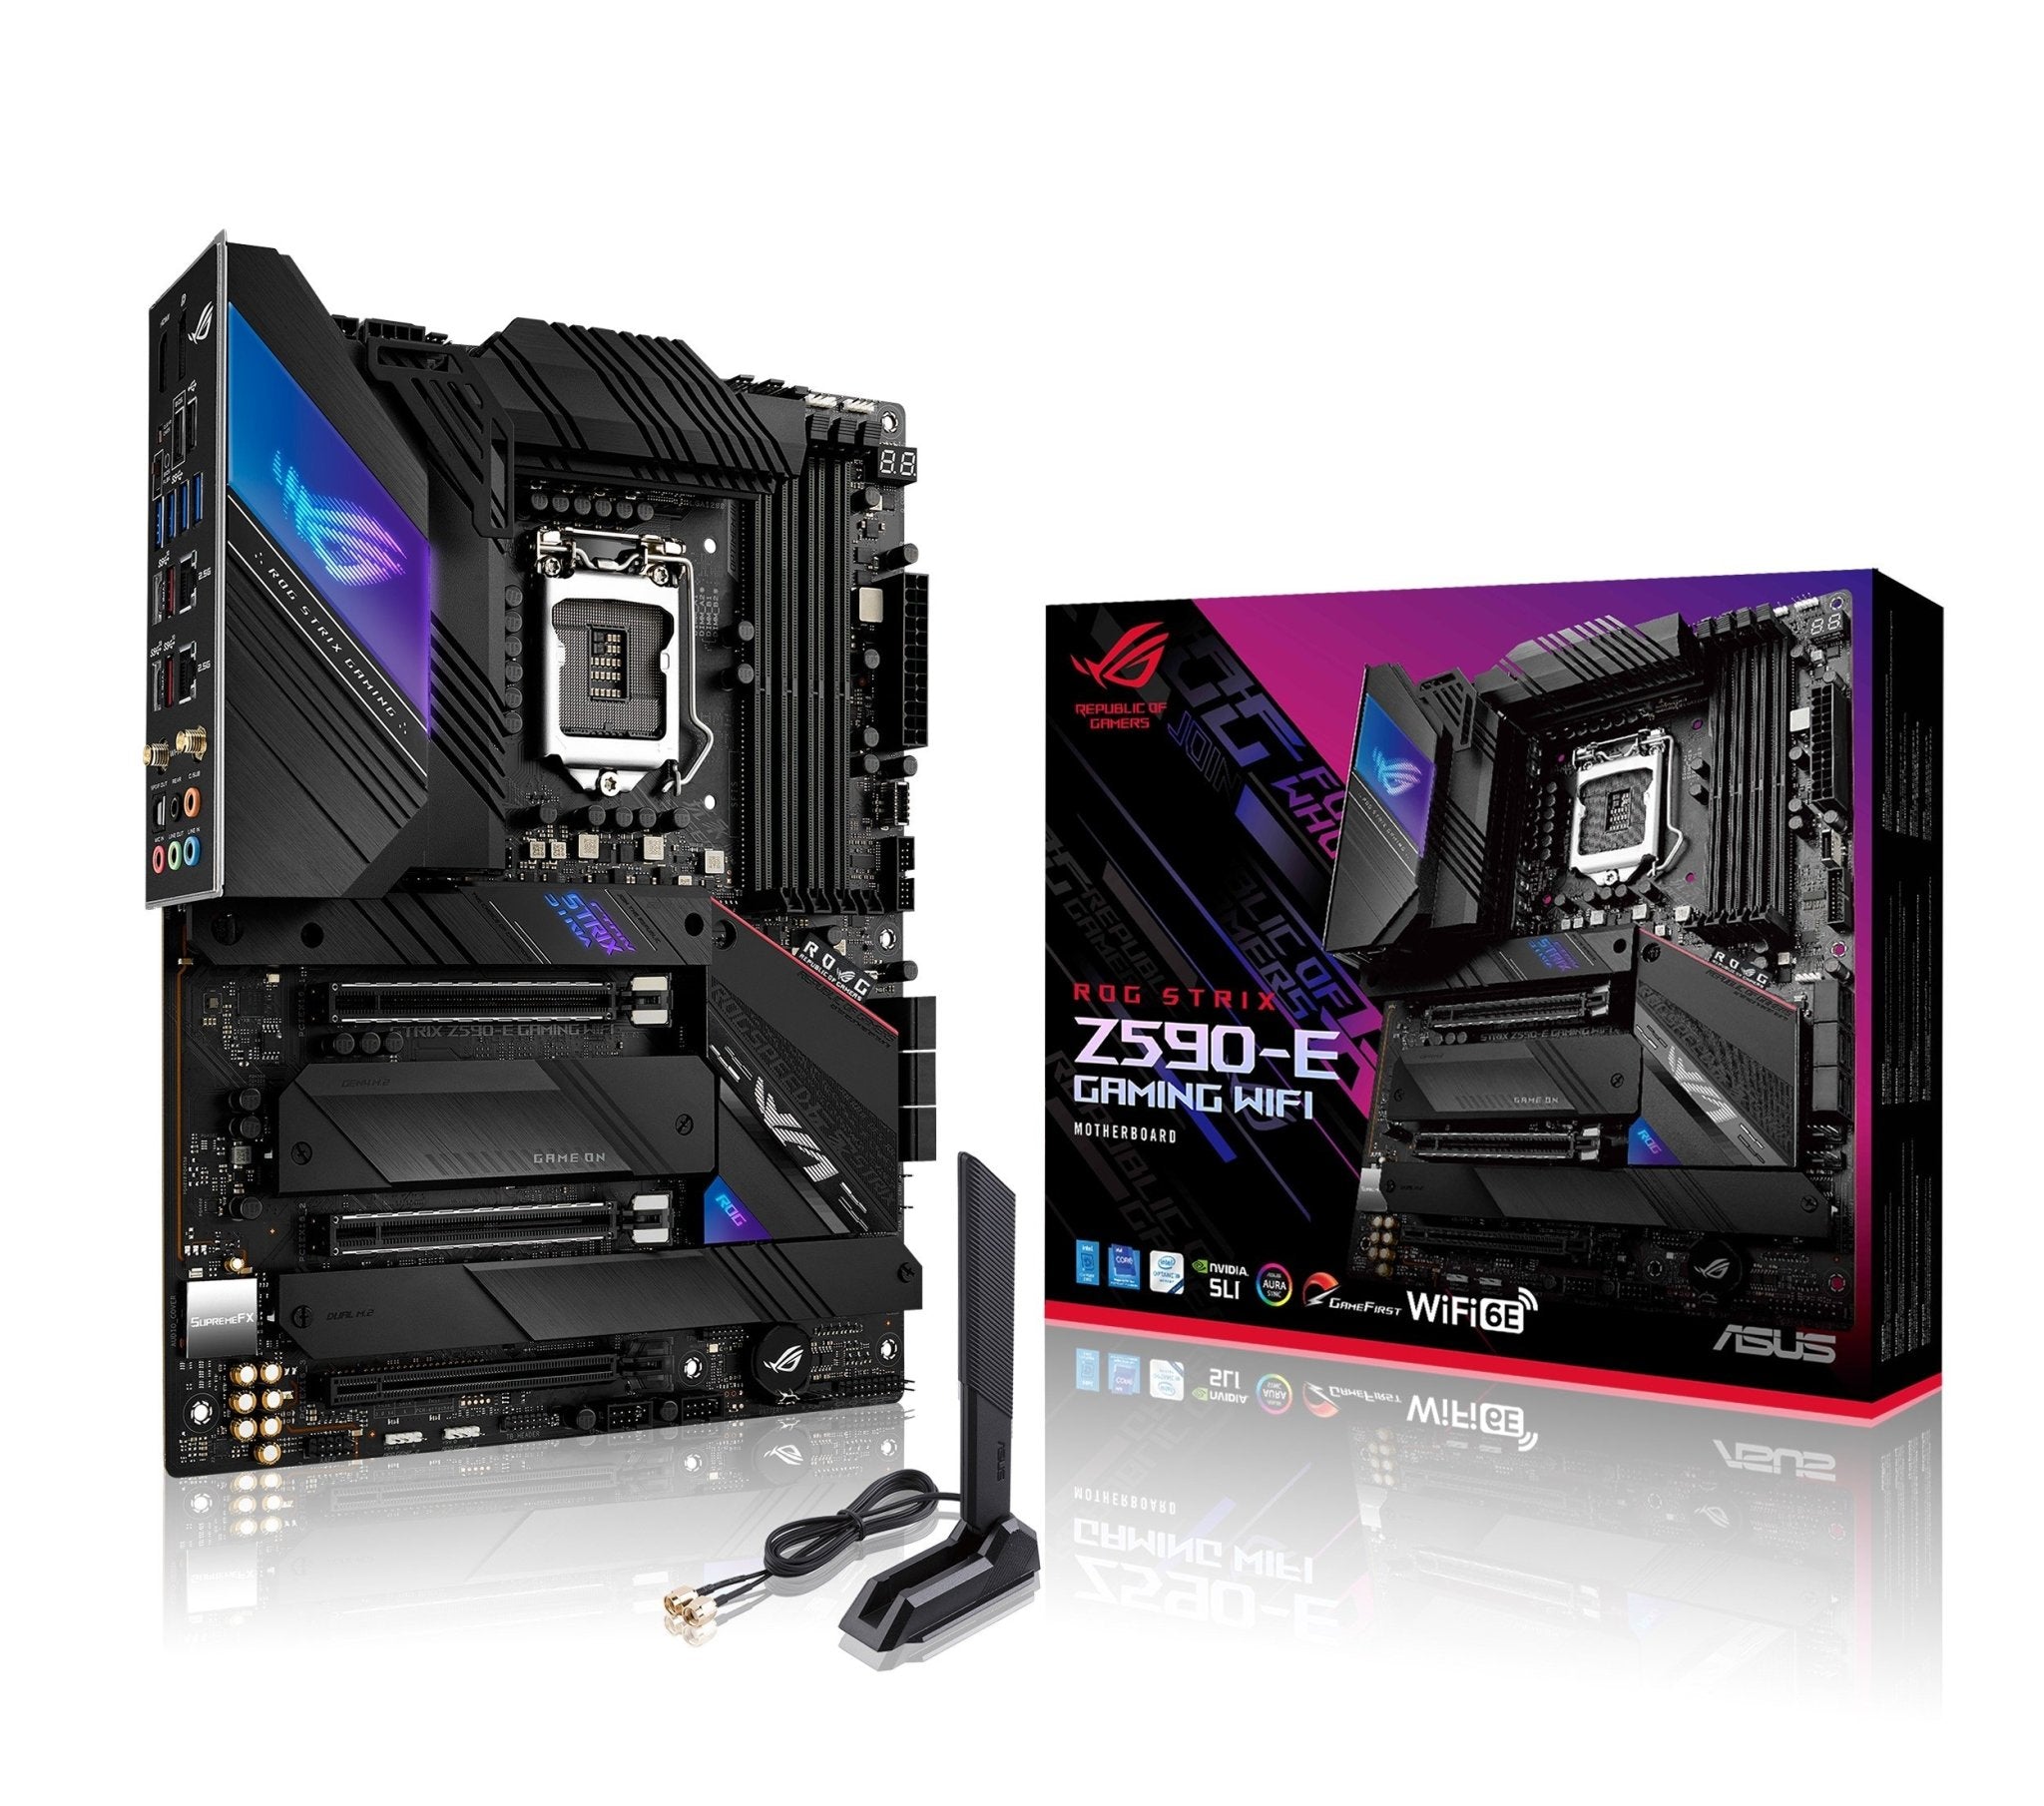 Asus ROG Strix Z590-E Gaming Wifi Motherboard - Store 974 | ستور ٩٧٤